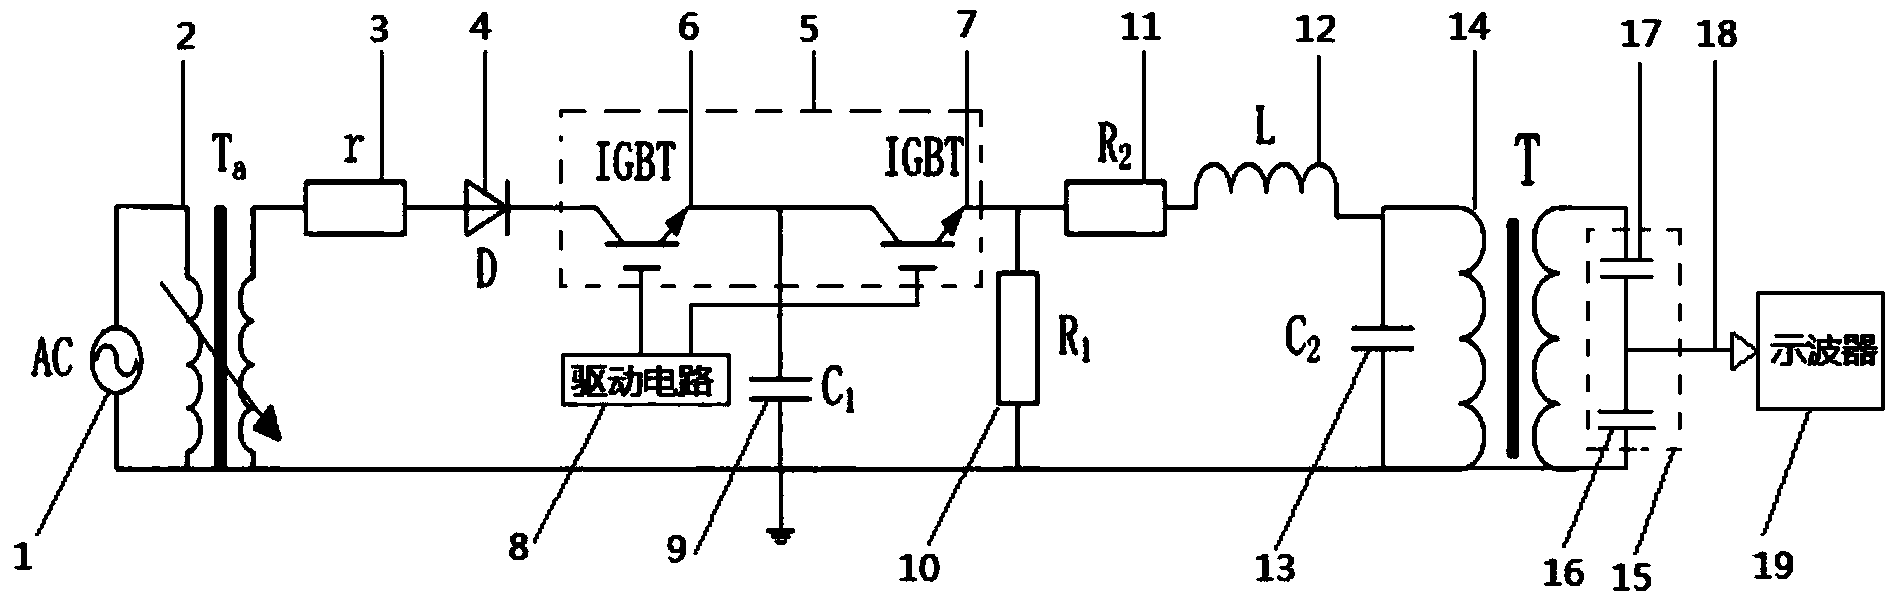 Transformer induced switching impulse voltage generation device triggered by IGBTs